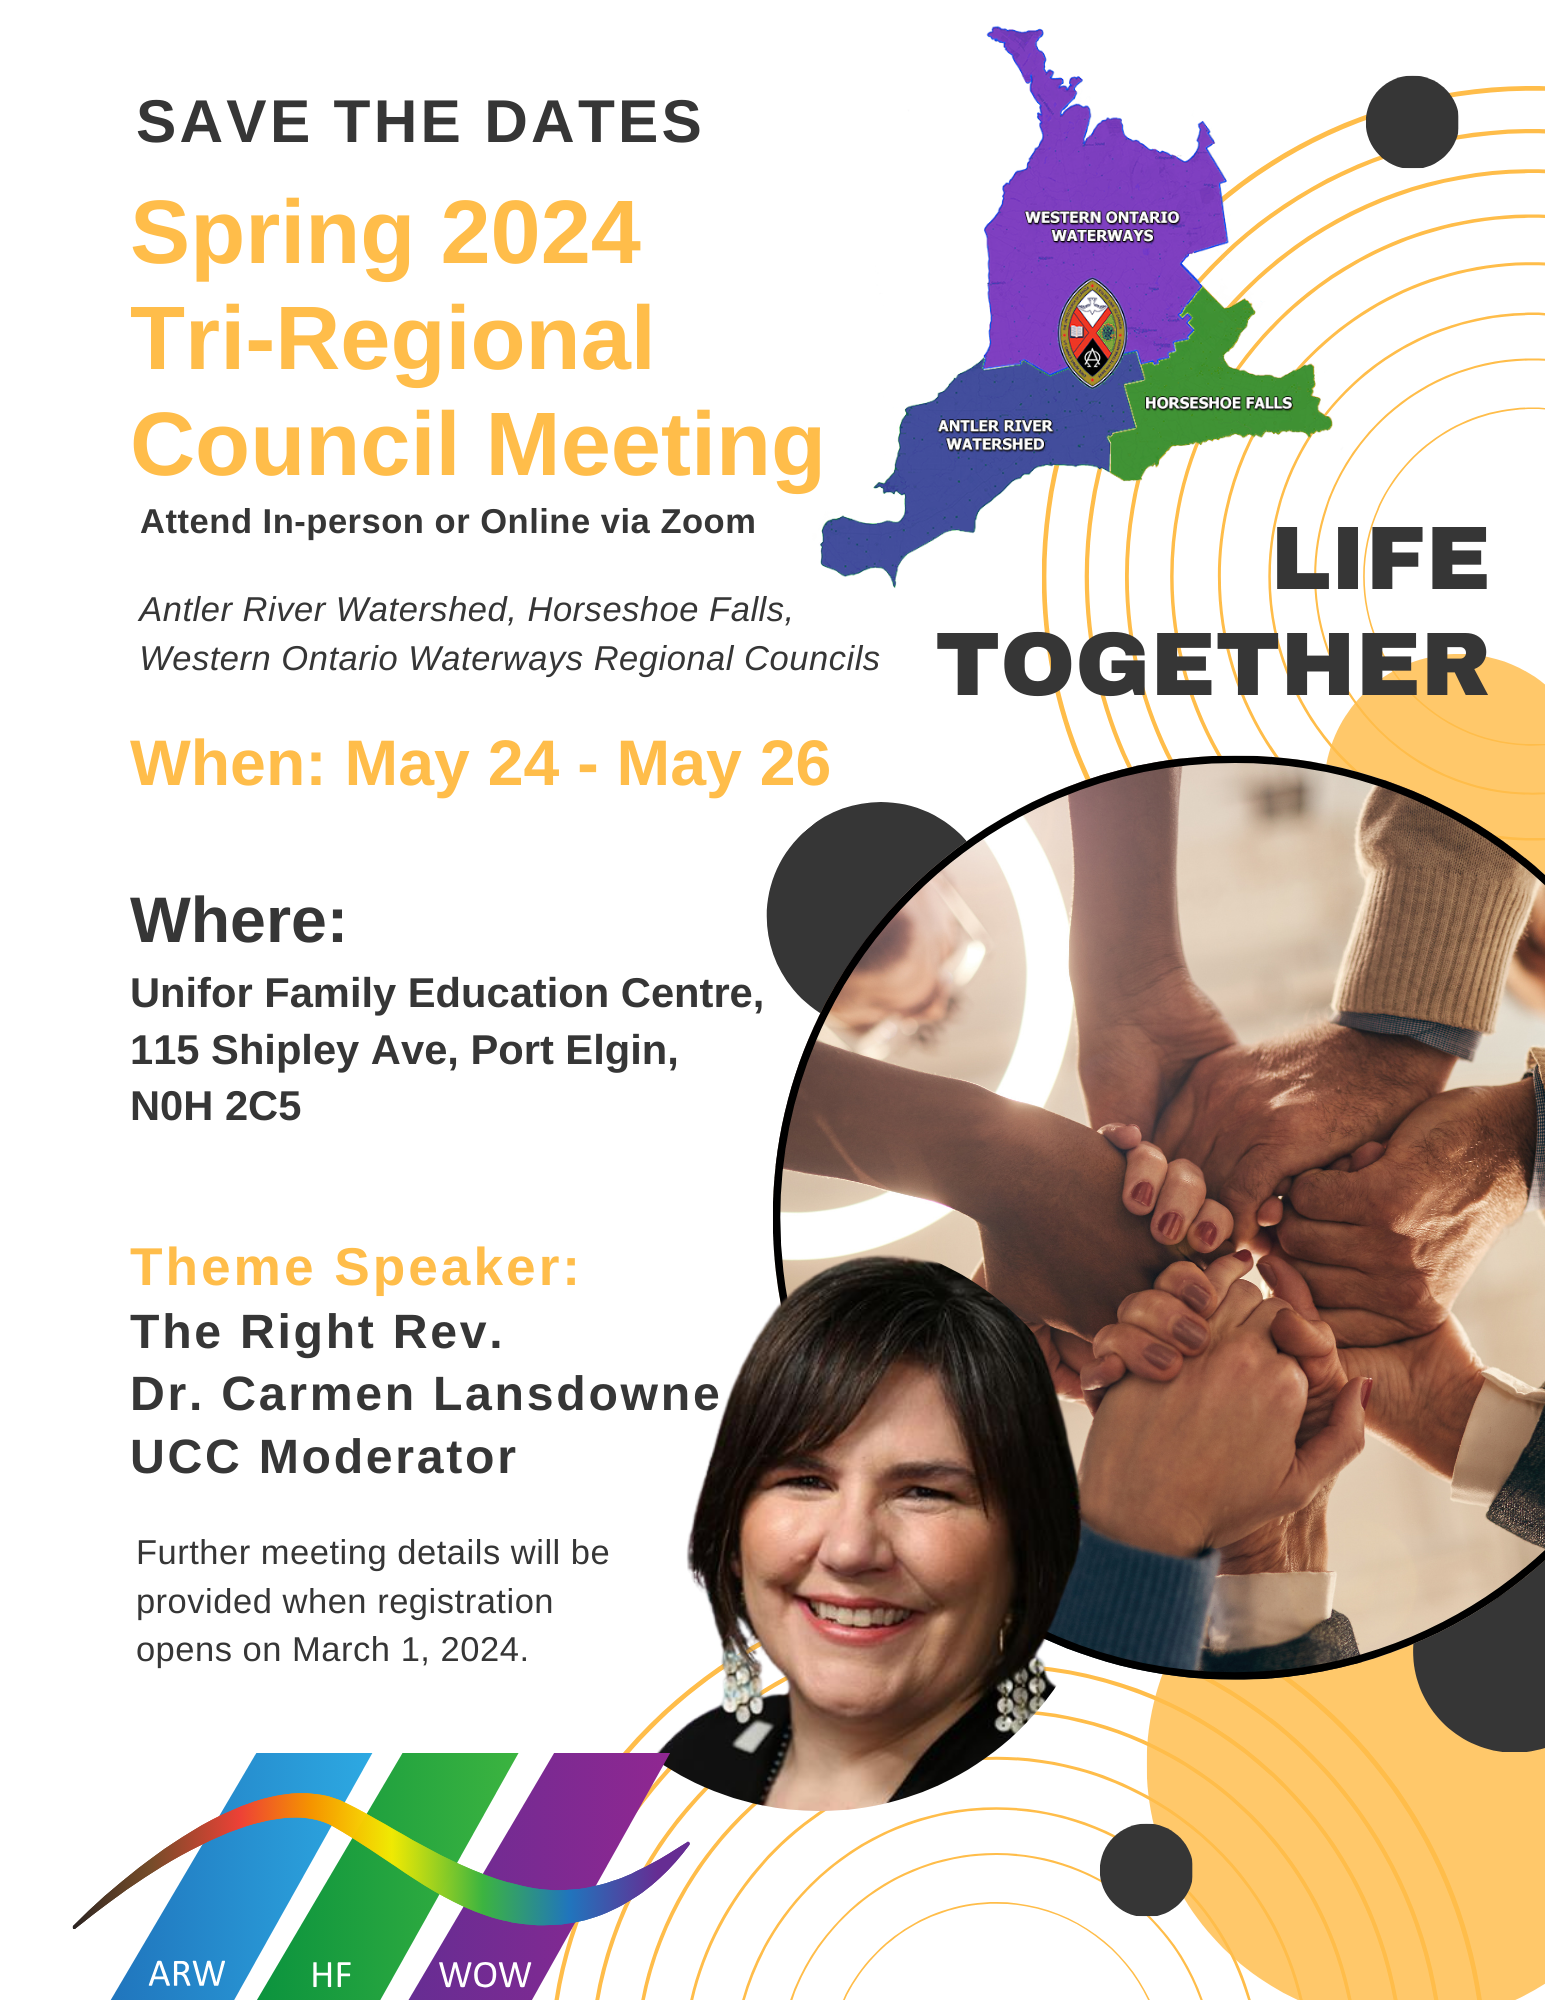 hands holding together, a woman with dark hair named Carmen Landsdowne promoting a meeting